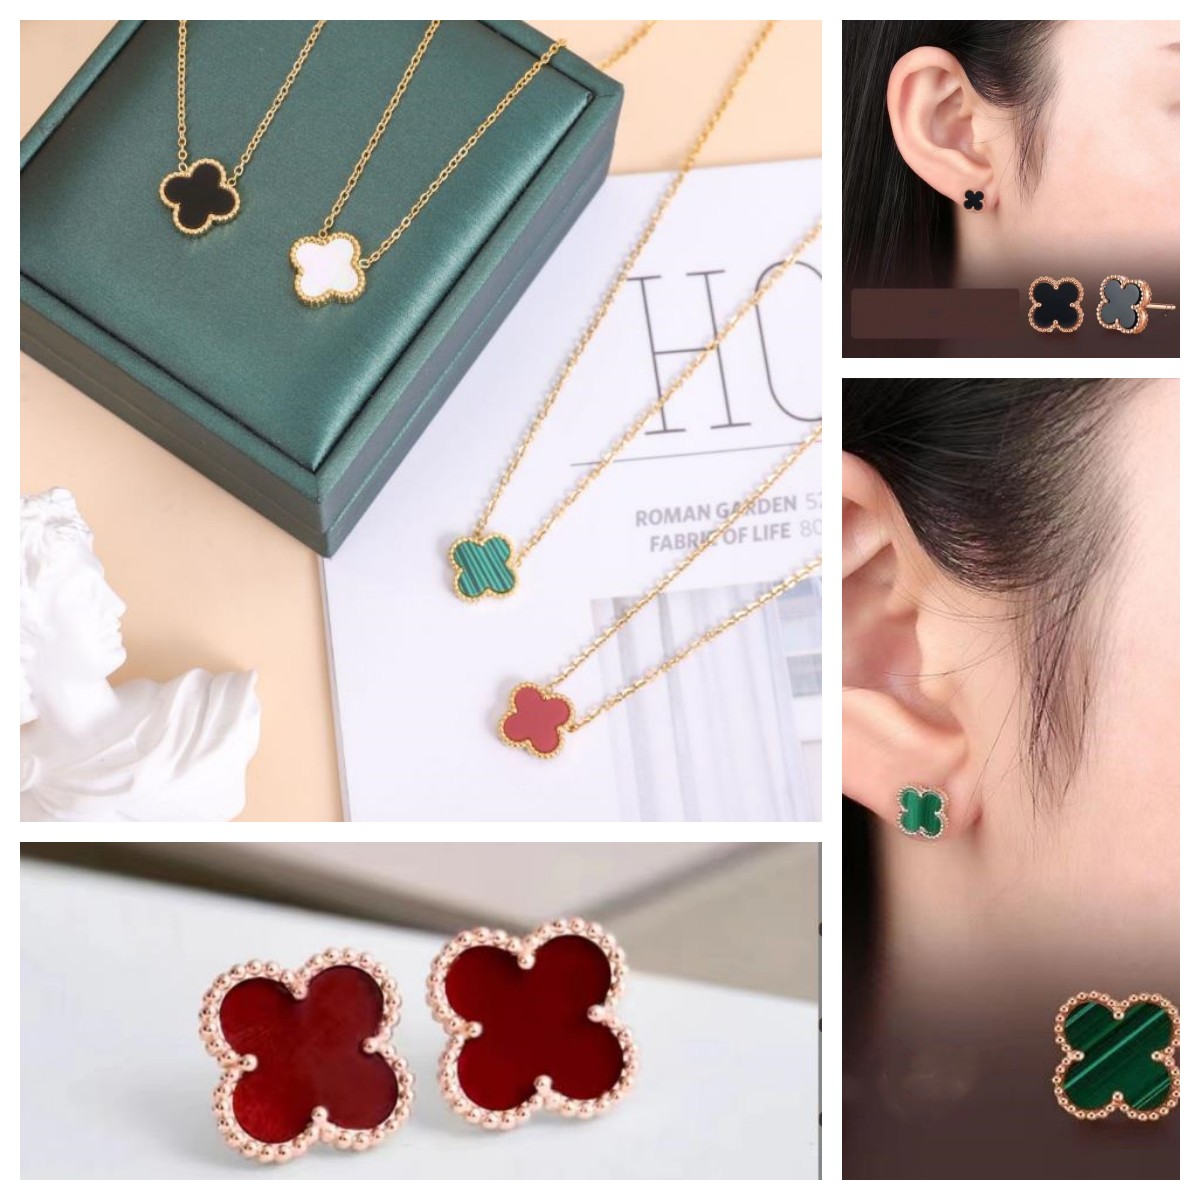 

Newest Classic Womens Designer Necklace Fashion Flowers Four-leaf Clover Cleef Pendant Necklace 18K Gold Necklace & ear stud Womens Jewelry Gifts no box